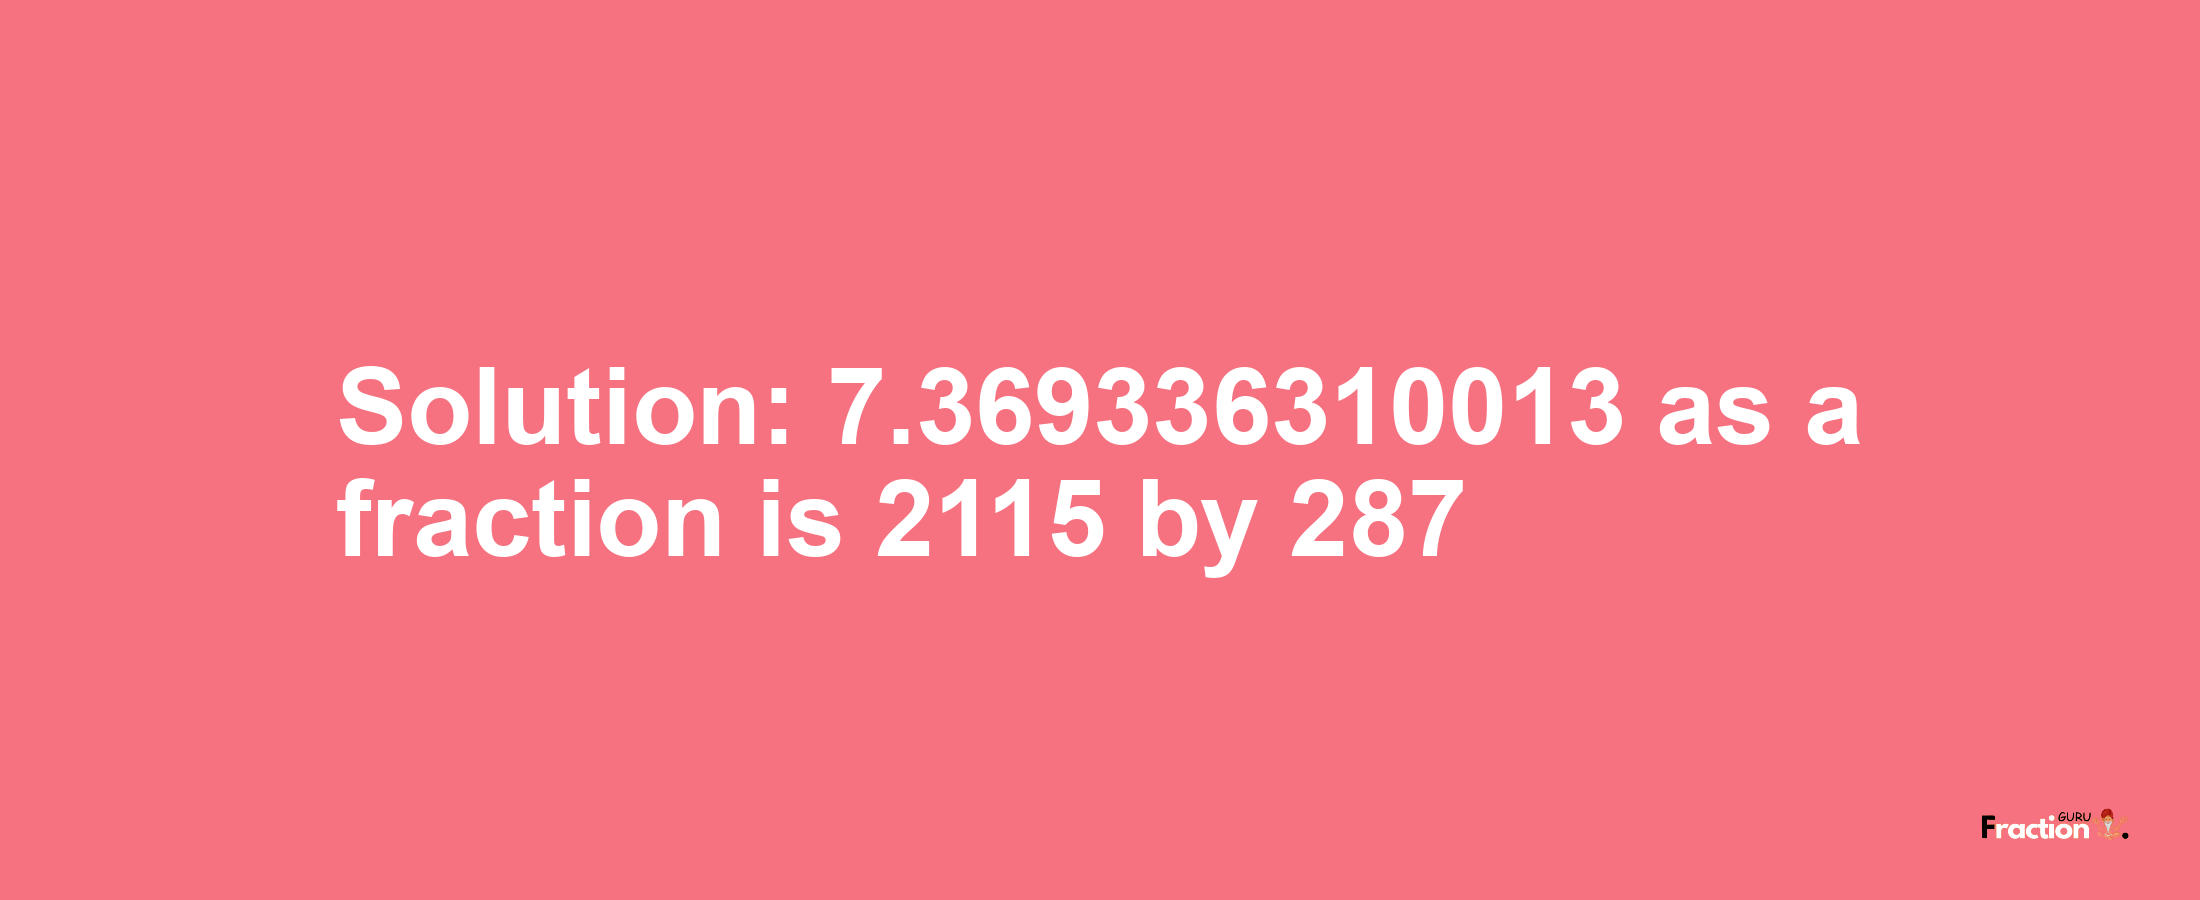 Solution:7.369336310013 as a fraction is 2115/287